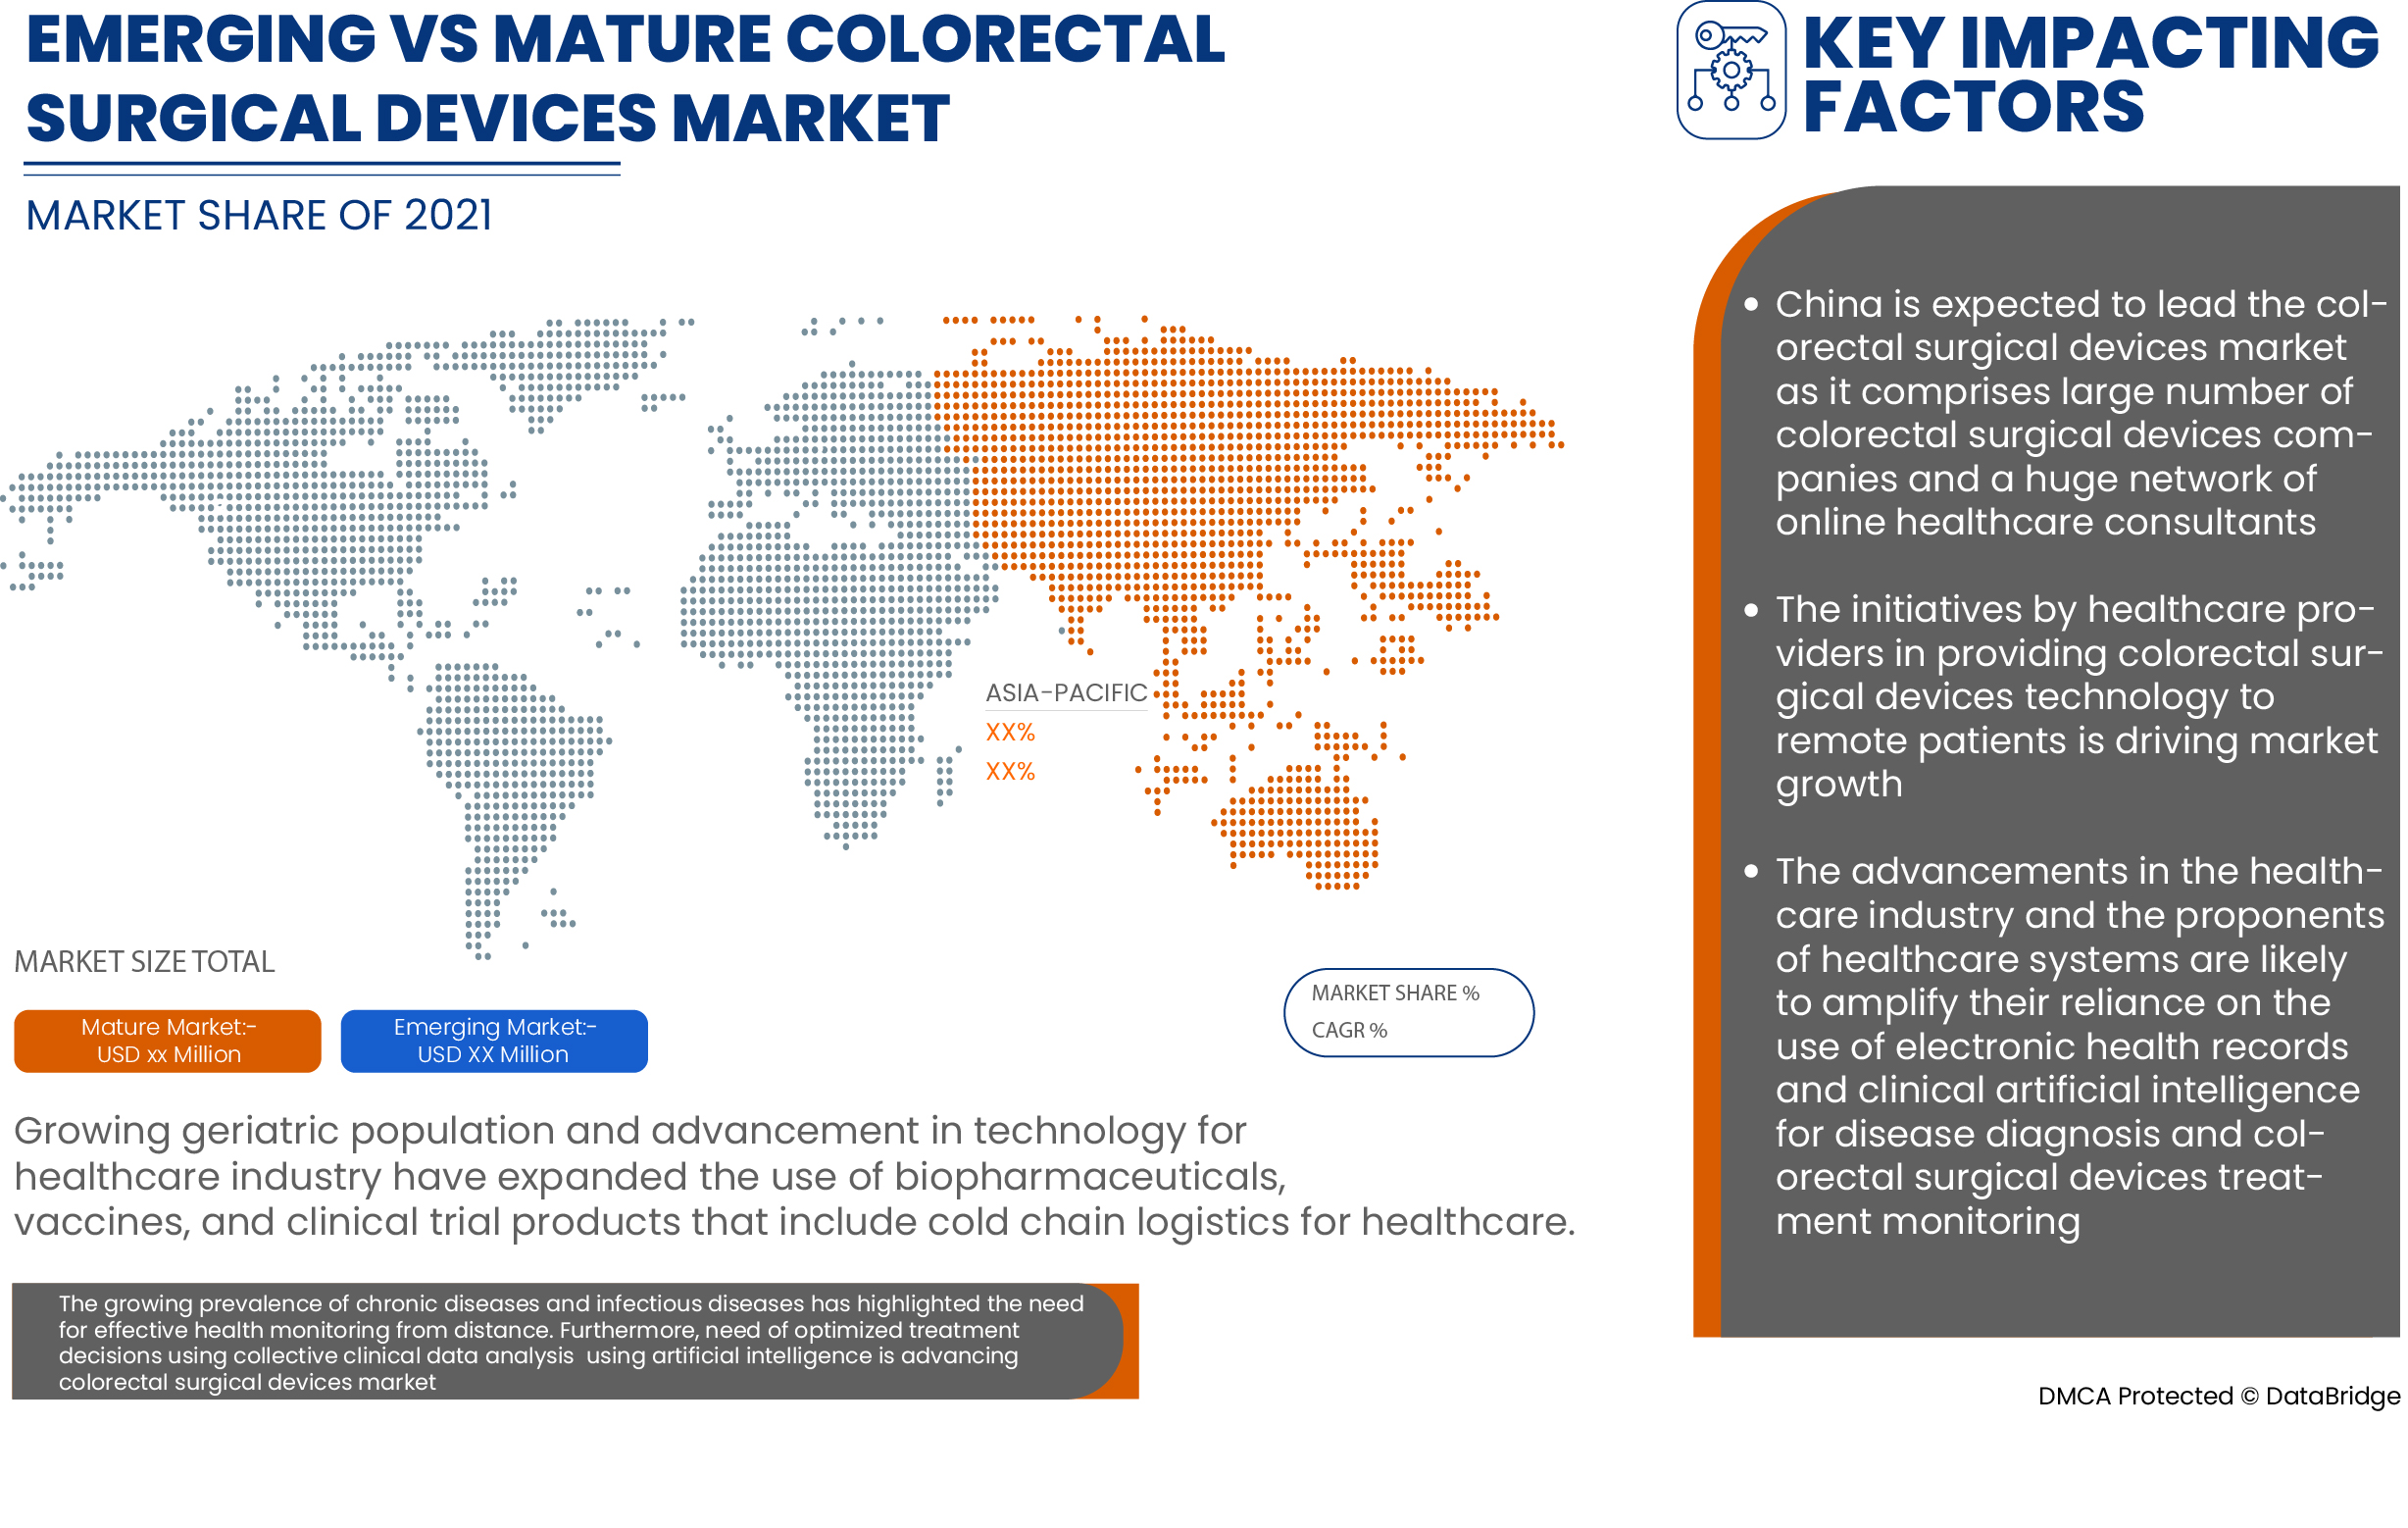 Asia-Pacific Colorectal Surgical Devices Market